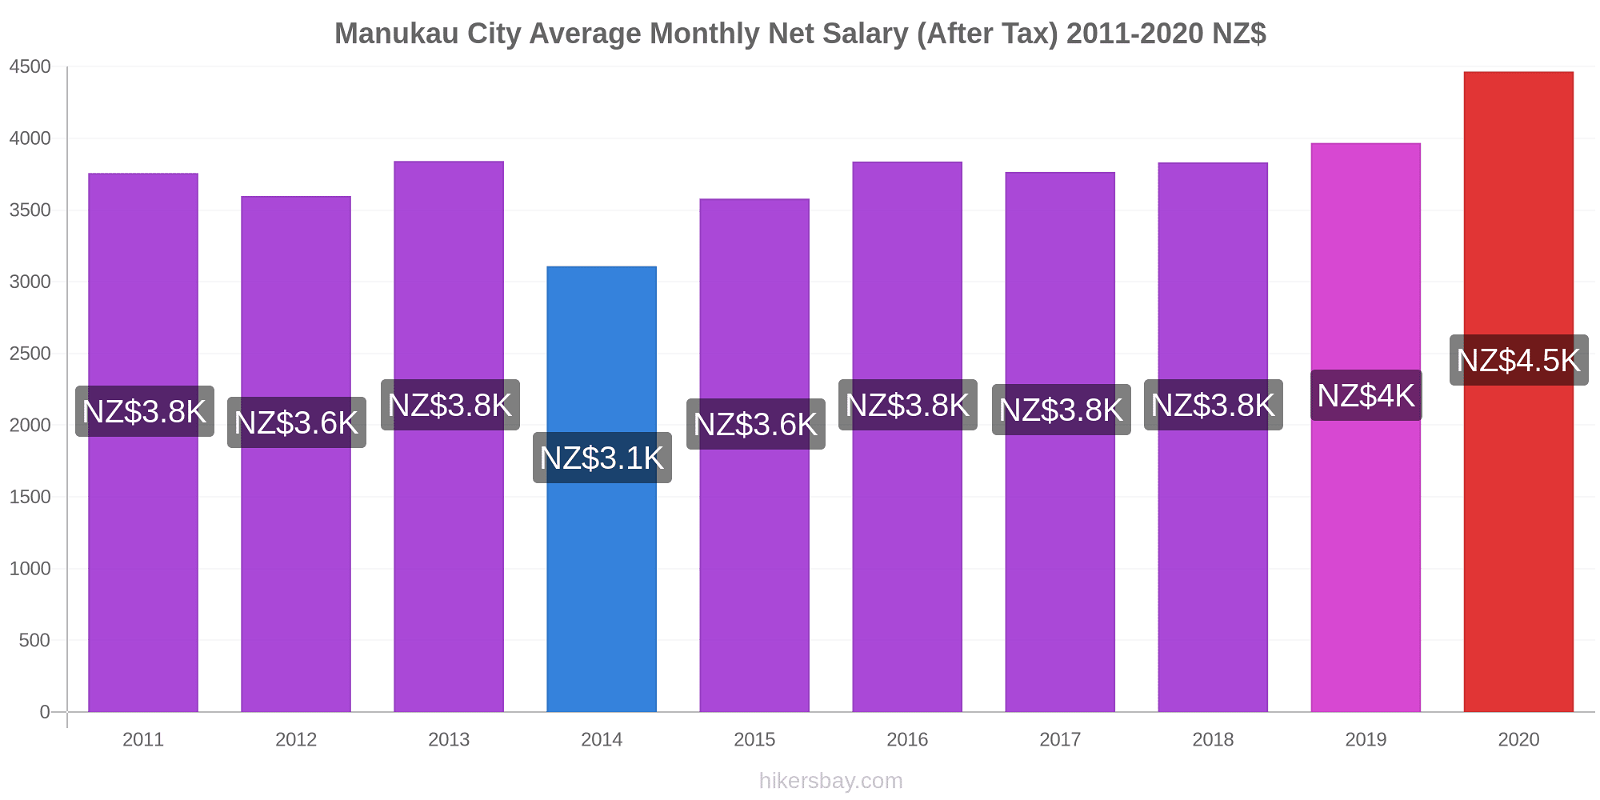 Manukau City price changes Average Monthly Net Salary (After Tax) hikersbay.com